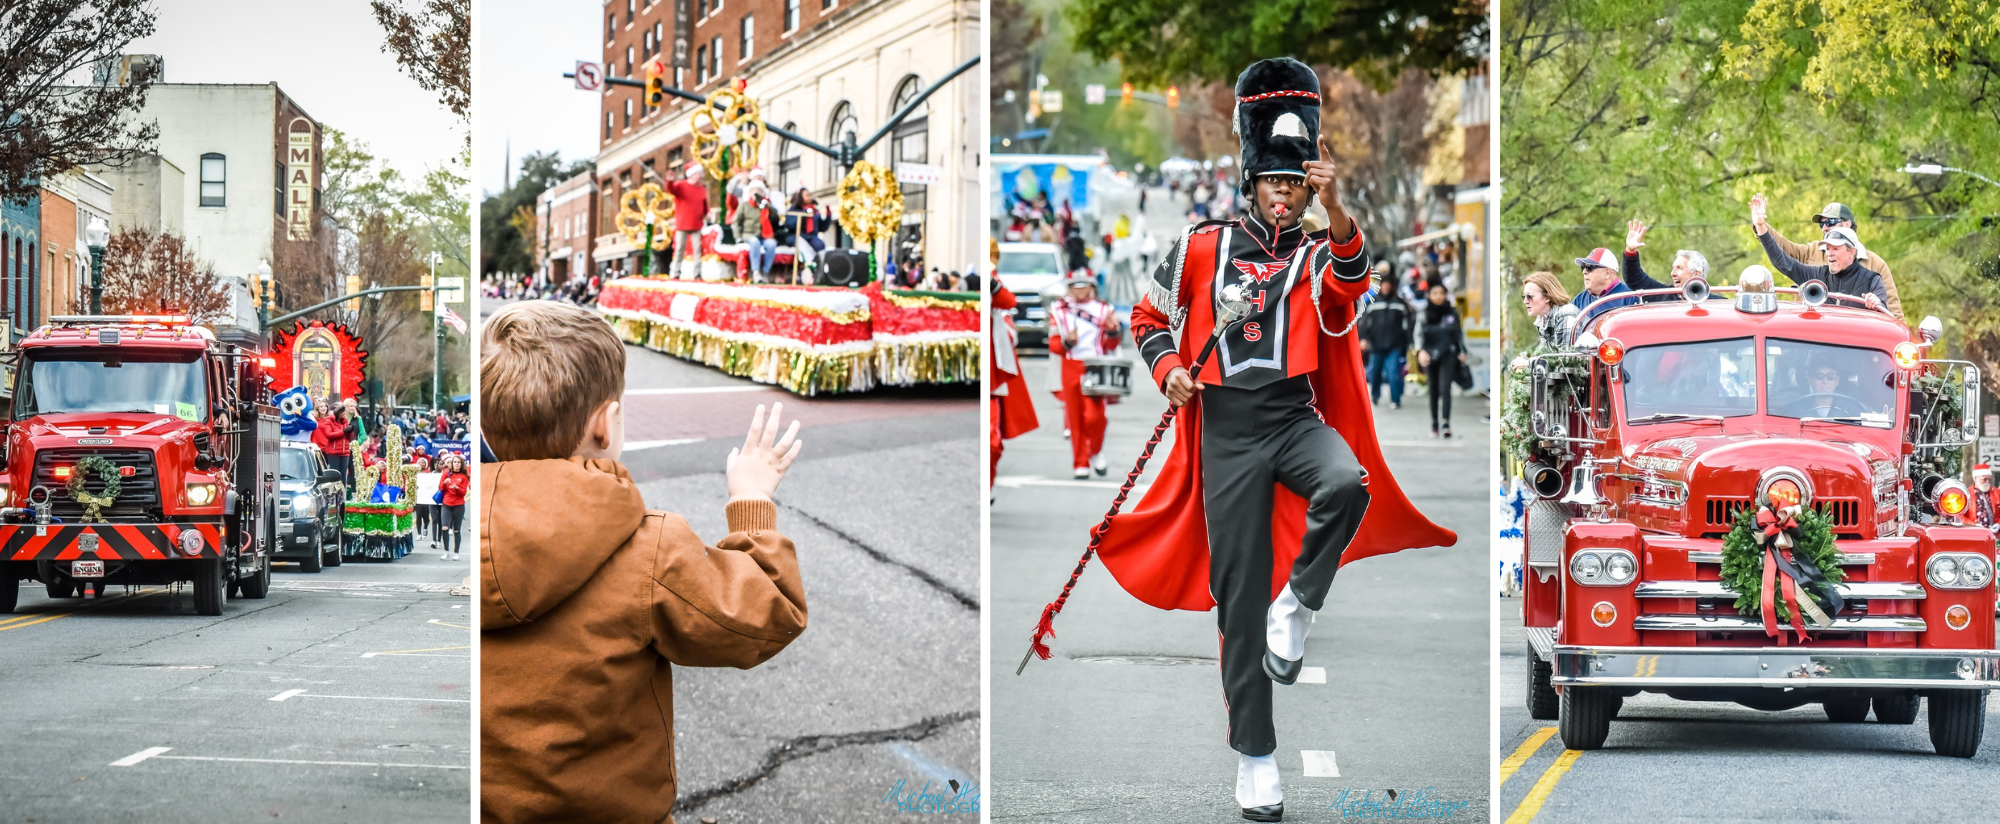 Parade images